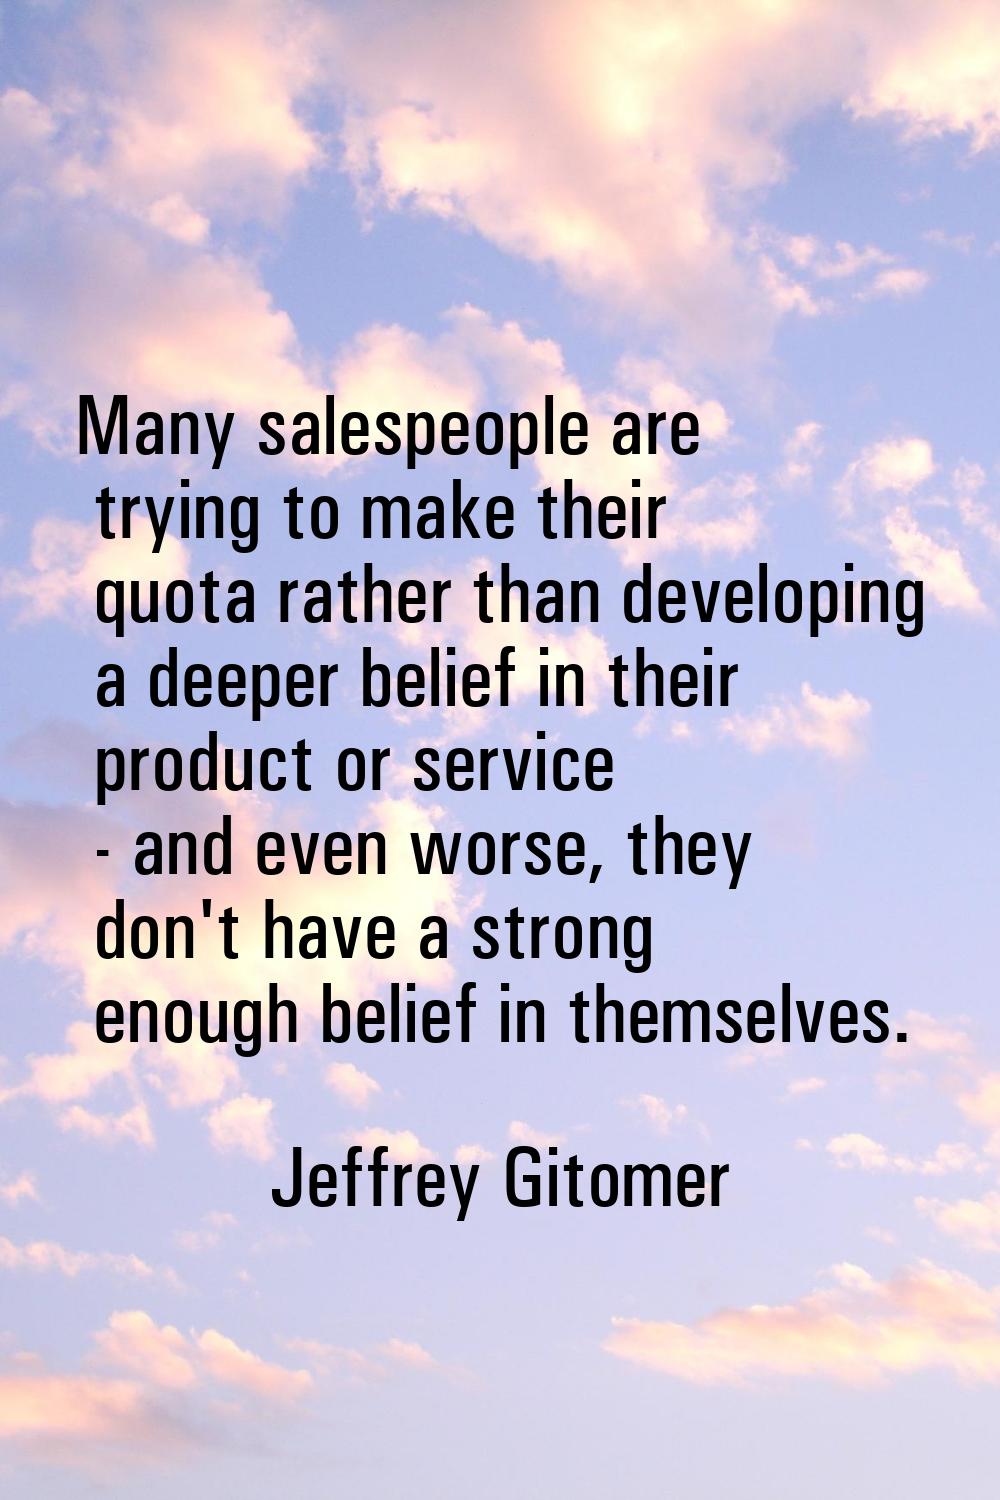 Many salespeople are trying to make their quota rather than developing a deeper belief in their pro